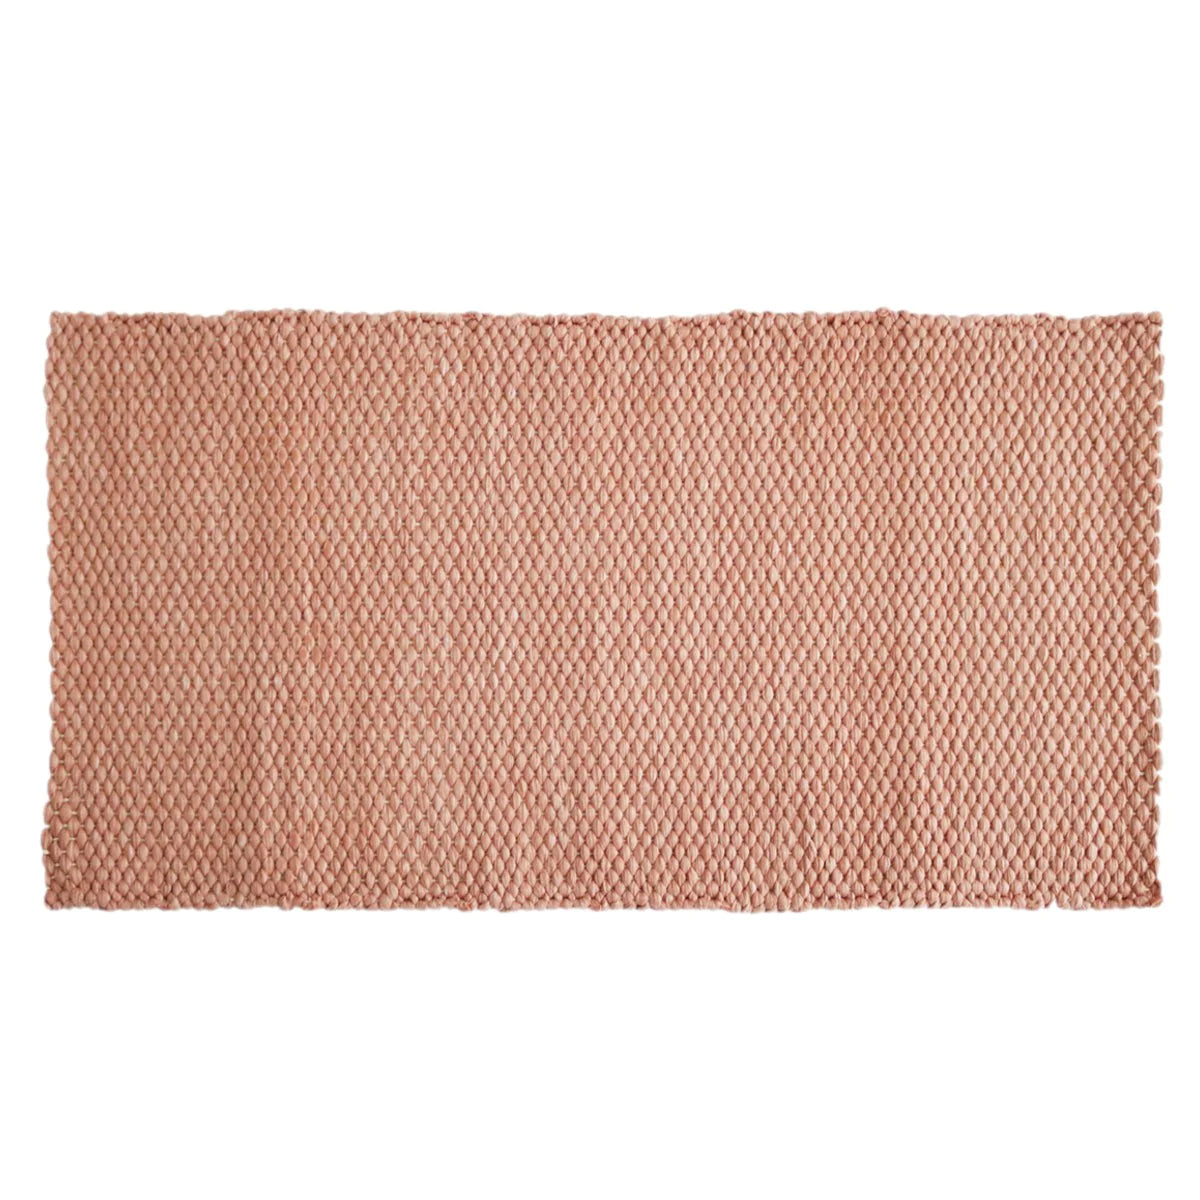 Deocriste Sustainable Rug Handwoven From Upcycled Fibers in Vintage Pink